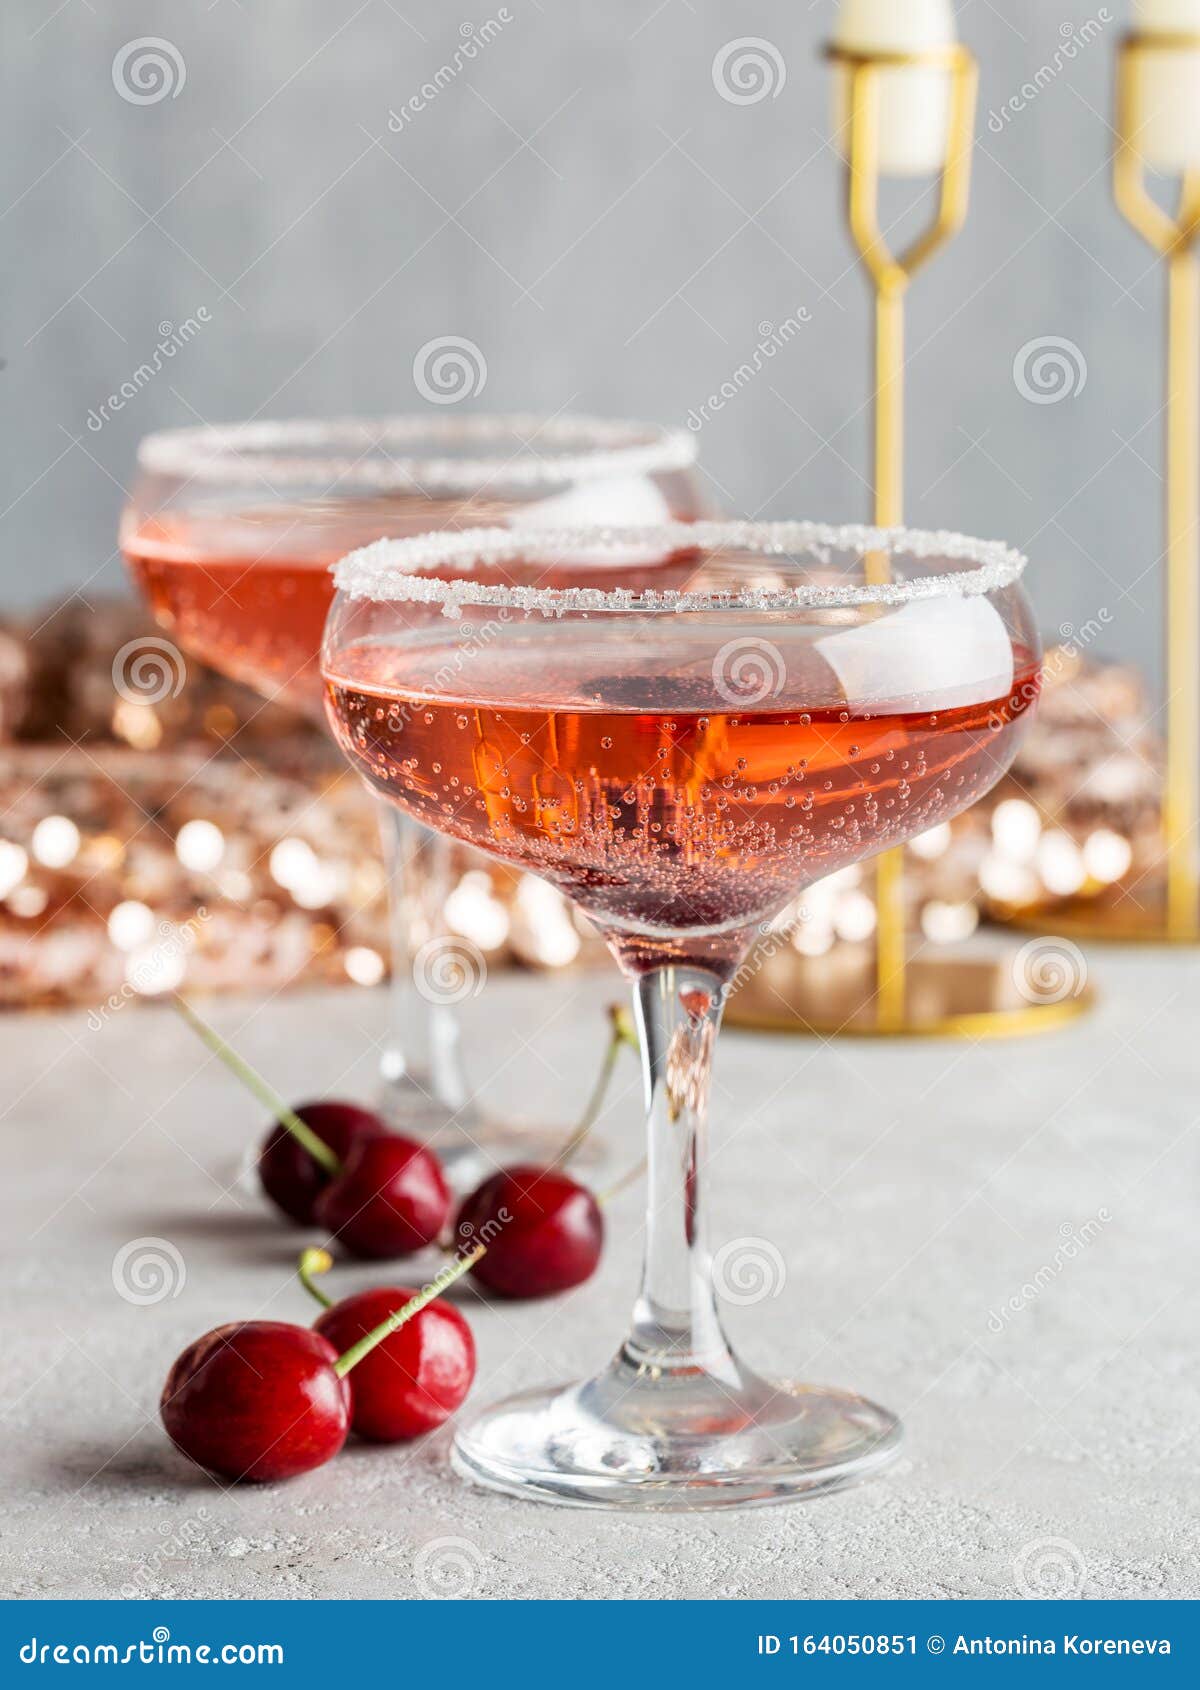 Cherry Champagne In Glasses With Berries On Party Stock Image - Image ...